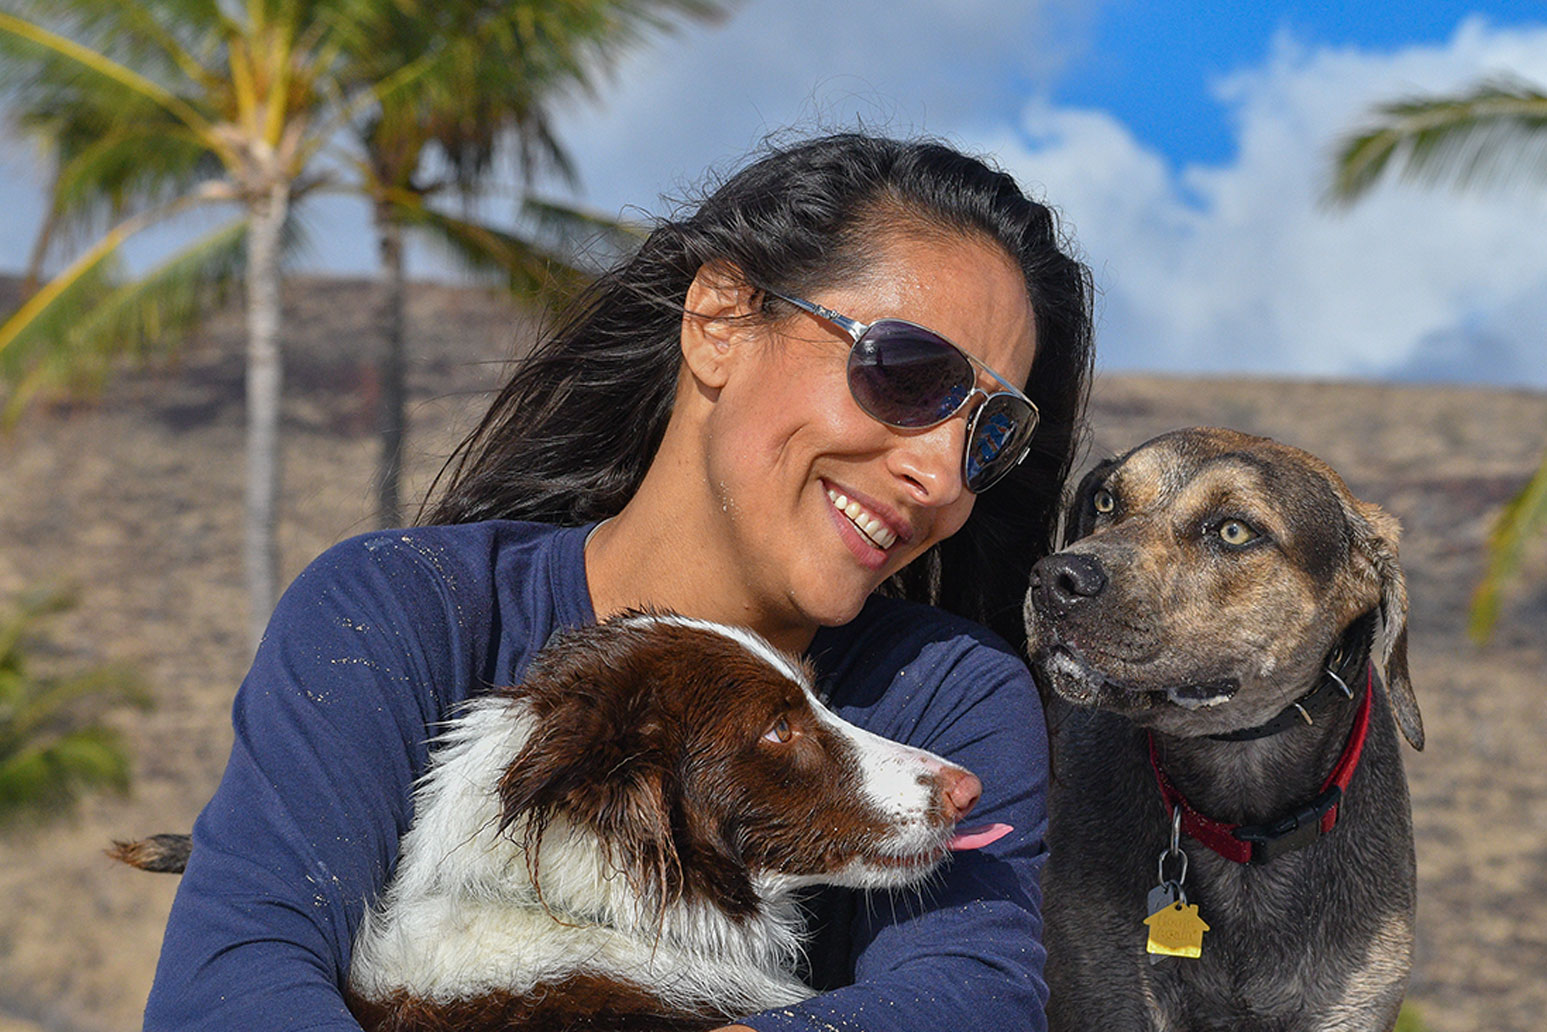 Maria with two dogs on the beach in Hawaii